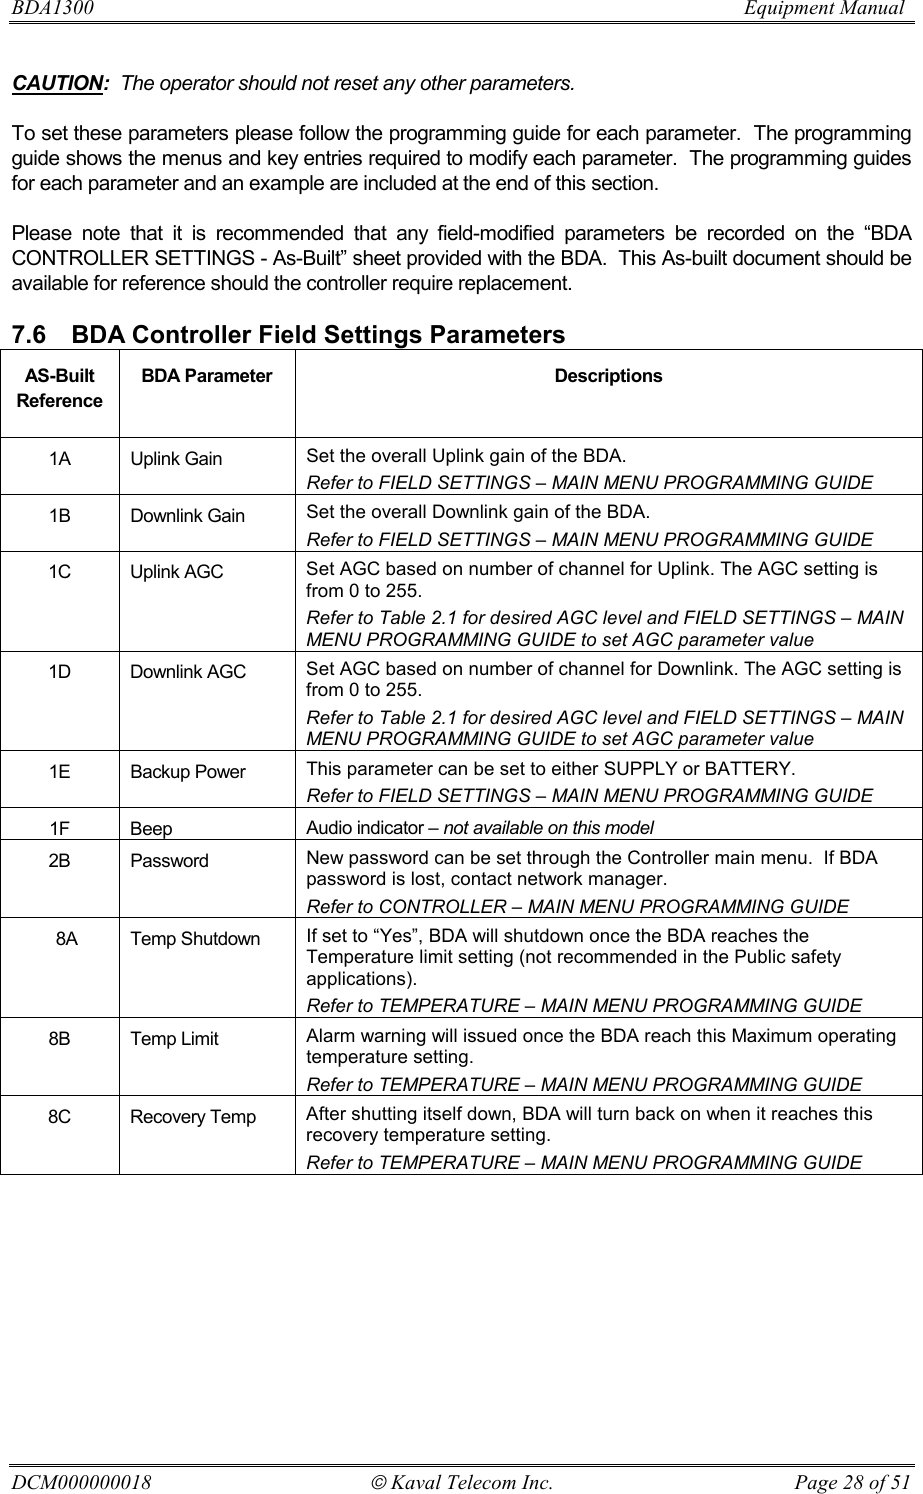 BDA1300                          Equipment Manual DCM000000018  Kaval Telecom Inc.  Page 28 of 51 CAUTION:  The operator should not reset any other parameters. To set these parameters please follow the programming guide for each parameter.  The programming guide shows the menus and key entries required to modify each parameter.  The programming guides for each parameter and an example are included at the end of this section.   Please note that it is recommended that any field-modified parameters be recorded on the “BDA CONTROLLER SETTINGS - As-Built” sheet provided with the BDA.  This As-built document should be available for reference should the controller require replacement. 7.6  BDA Controller Field Settings Parameters AS-Built Reference BDA Parameter  Descriptions 1A Uplink Gain  Set the overall Uplink gain of the BDA.   Refer to FIELD SETTINGS – MAIN MENU PROGRAMMING GUIDE 1B Downlink Gain Set the overall Downlink gain of the BDA.  Refer to FIELD SETTINGS – MAIN MENU PROGRAMMING GUIDE  1C Uplink AGC  Set AGC based on number of channel for Uplink. The AGC setting is from 0 to 255.   Refer to Table 2.1 for desired AGC level and FIELD SETTINGS – MAIN MENU PROGRAMMING GUIDE to set AGC parameter value 1D Downlink AGC Set AGC based on number of channel for Downlink. The AGC setting is from 0 to 255.   Refer to Table 2.1 for desired AGC level and FIELD SETTINGS – MAIN MENU PROGRAMMING GUIDE to set AGC parameter value 1E  Backup Power   This parameter can be set to either SUPPLY or BATTERY.  Refer to FIELD SETTINGS – MAIN MENU PROGRAMMING GUIDE 1F Beep  Audio indicator – not available on this model 2B Password  New password can be set through the Controller main menu.  If BDA password is lost, contact network manager.  Refer to CONTROLLER – MAIN MENU PROGRAMMING GUIDE    8A  Temp Shutdown  If set to “Yes”, BDA will shutdown once the BDA reaches the Temperature limit setting (not recommended in the Public safety applications). Refer to TEMPERATURE – MAIN MENU PROGRAMMING GUIDE 8B Temp Limit  Alarm warning will issued once the BDA reach this Maximum operating temperature setting. Refer to TEMPERATURE – MAIN MENU PROGRAMMING GUIDE 8C Recovery Temp After shutting itself down, BDA will turn back on when it reaches this recovery temperature setting. Refer to TEMPERATURE – MAIN MENU PROGRAMMING GUIDE   